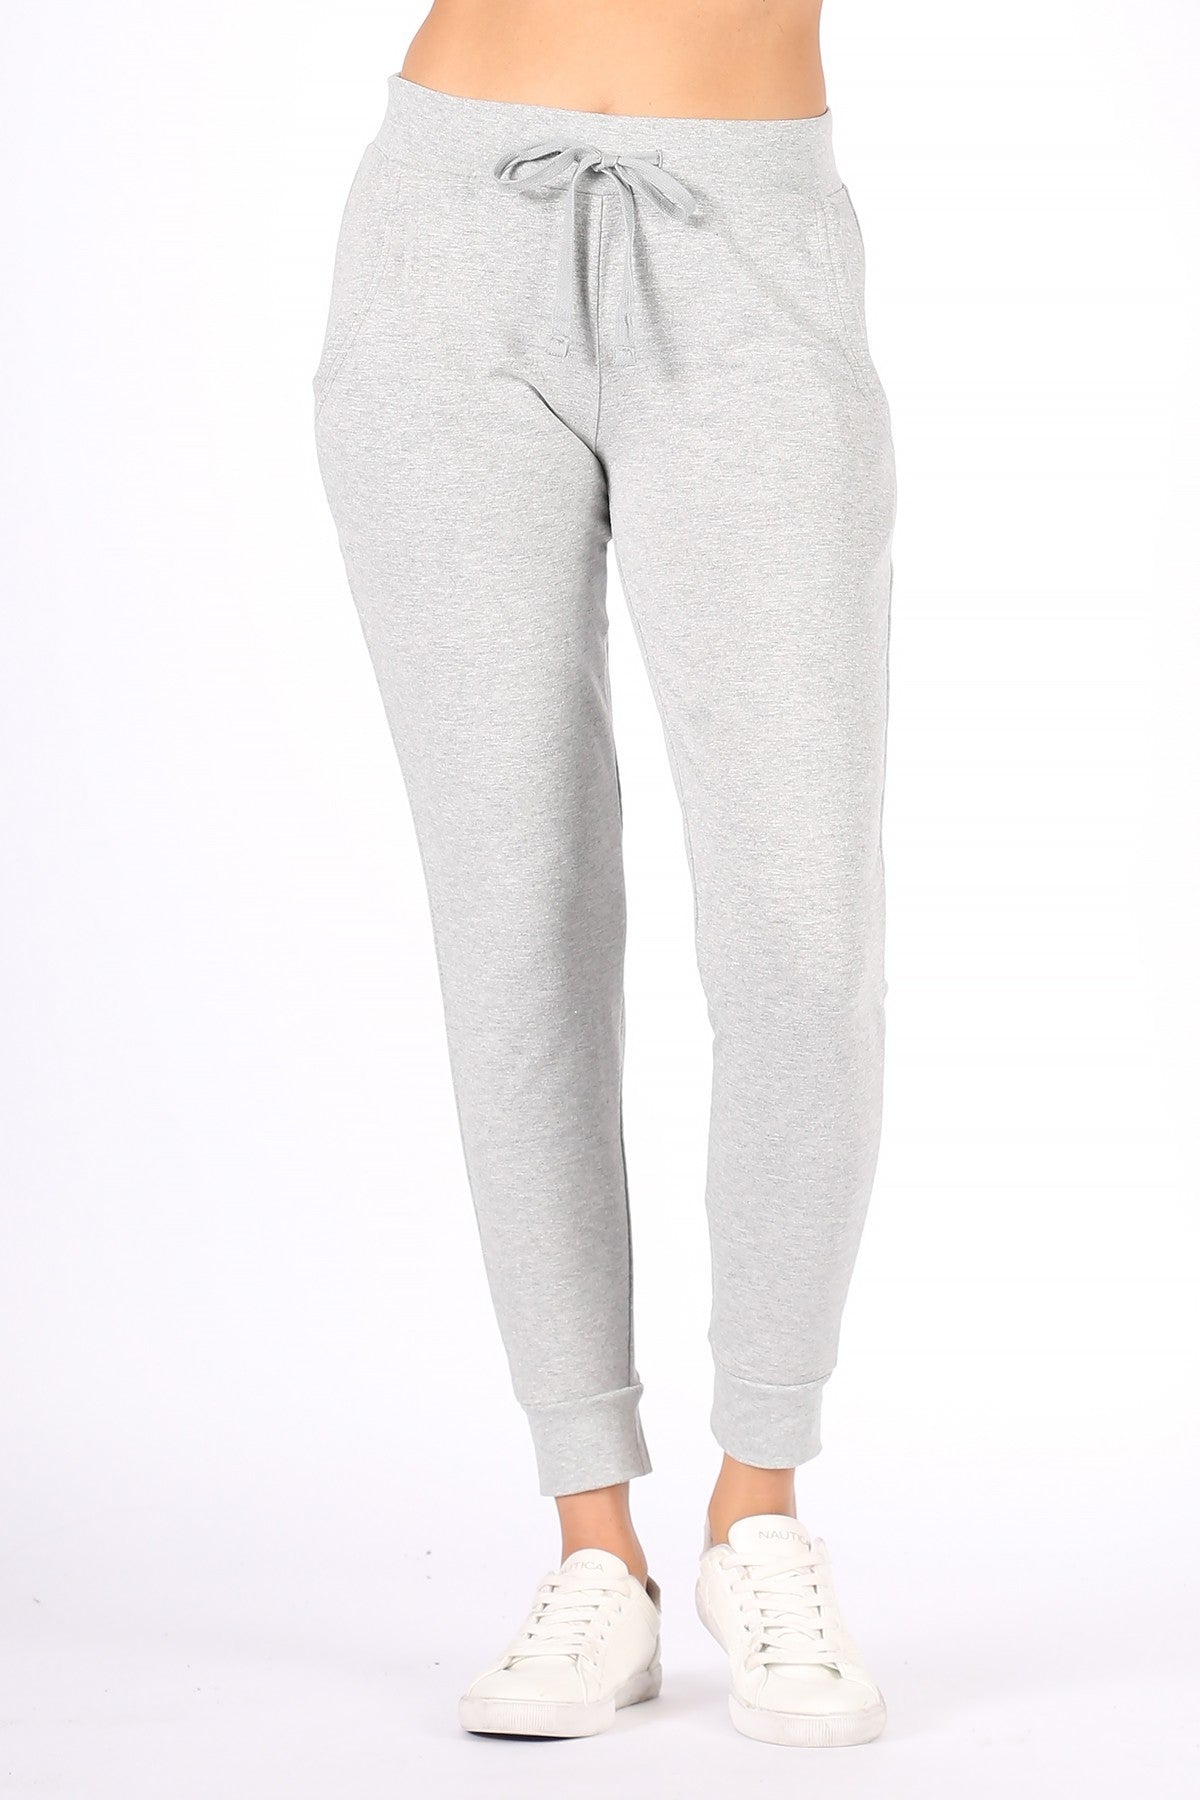 French Terry Jogger Sweatpants *Two side pockets *Adjustable drawstring waistband Model: 5'7" wearing size Small